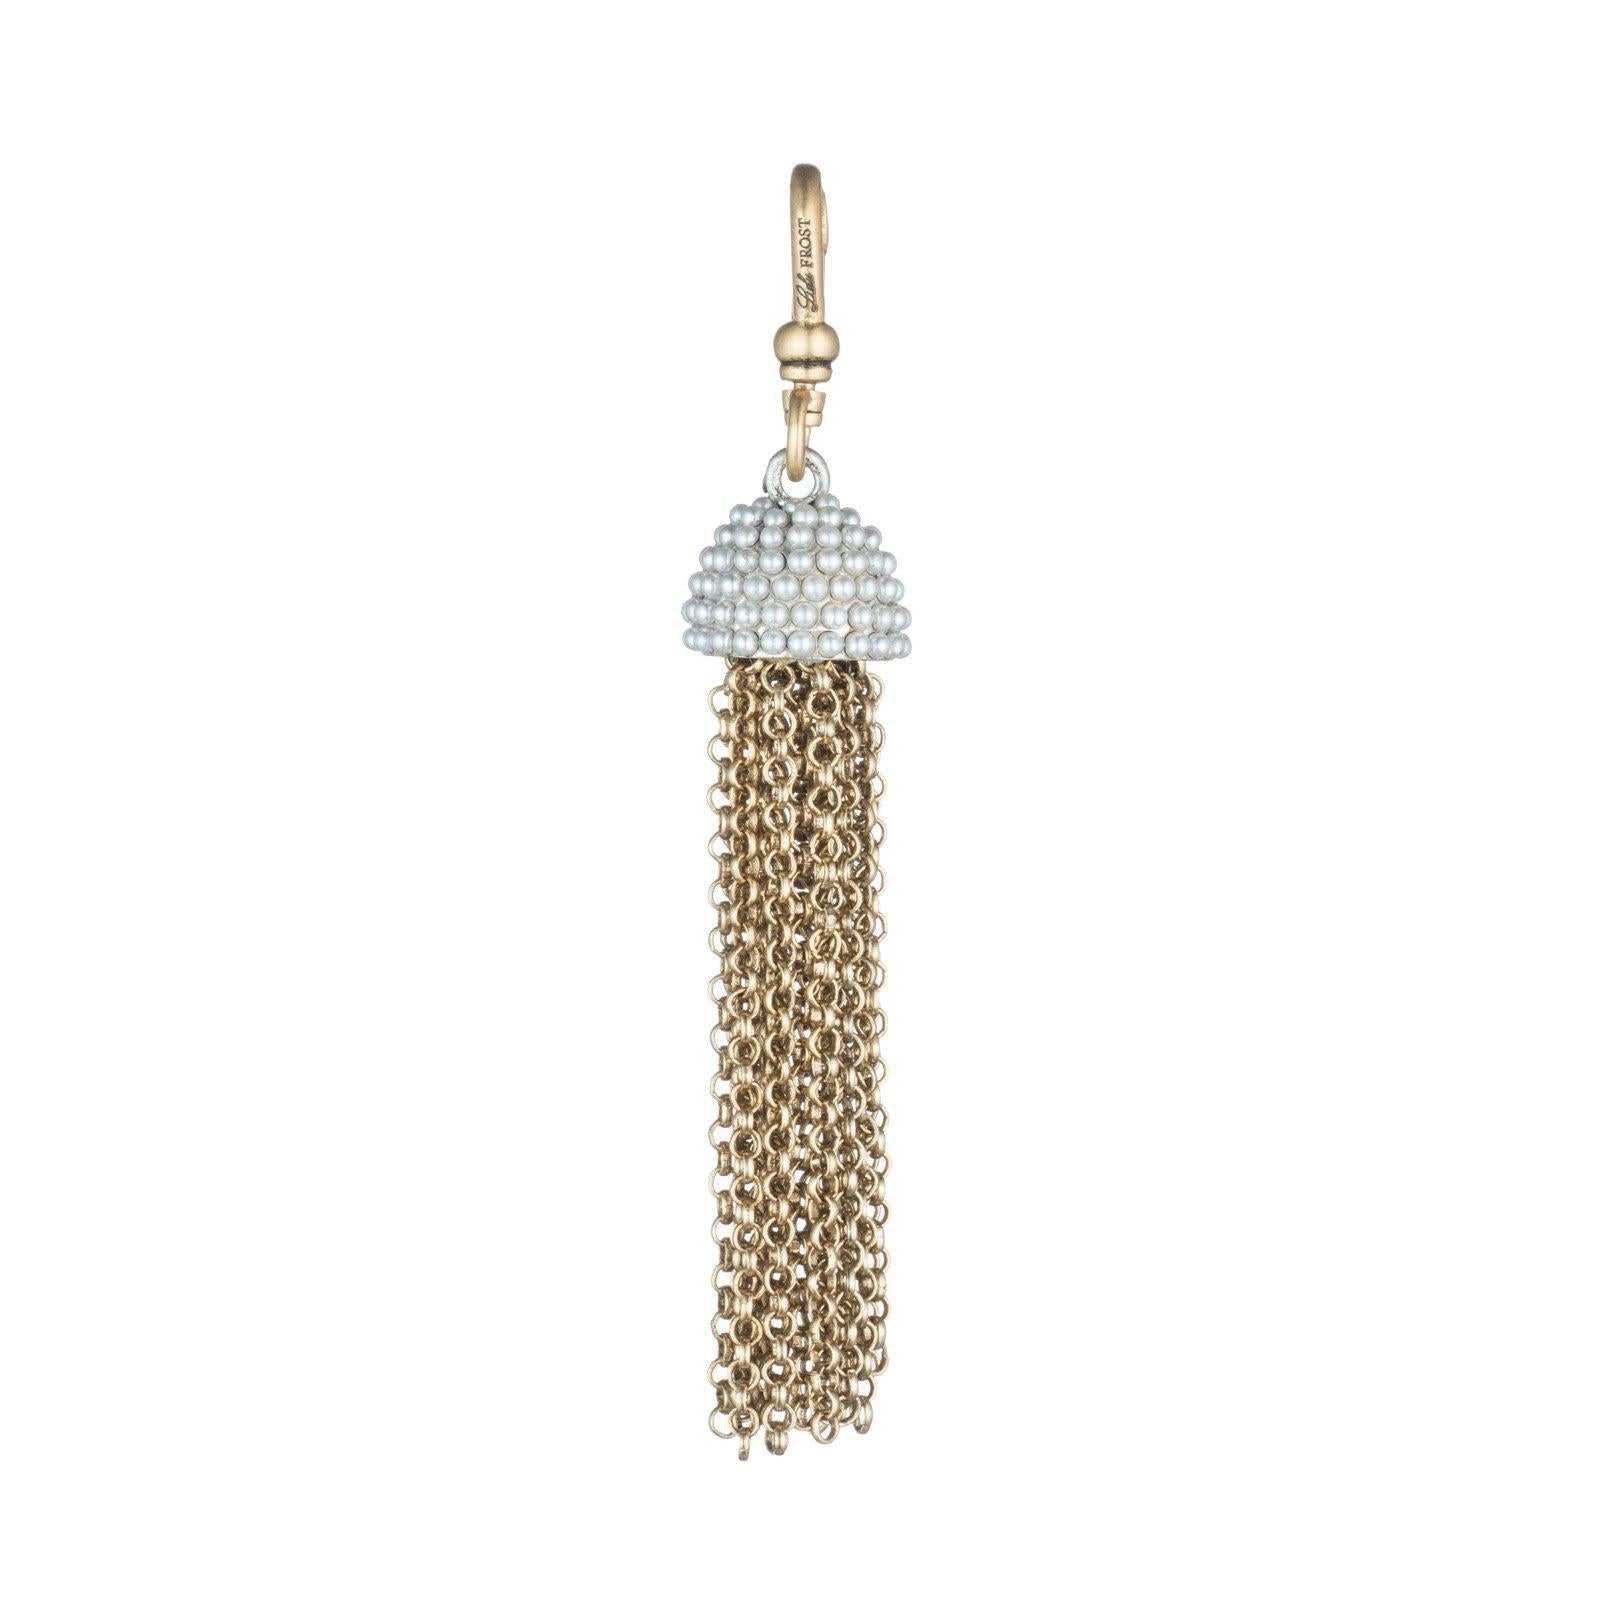 This Lulu Frost charm is inspired by 60's icon Ursula Andress, featuring pearl-encrusted dome tops paired with cascading chain tassels. Pair with one of the chain bases and add additional charms to create a special piece all your own. 